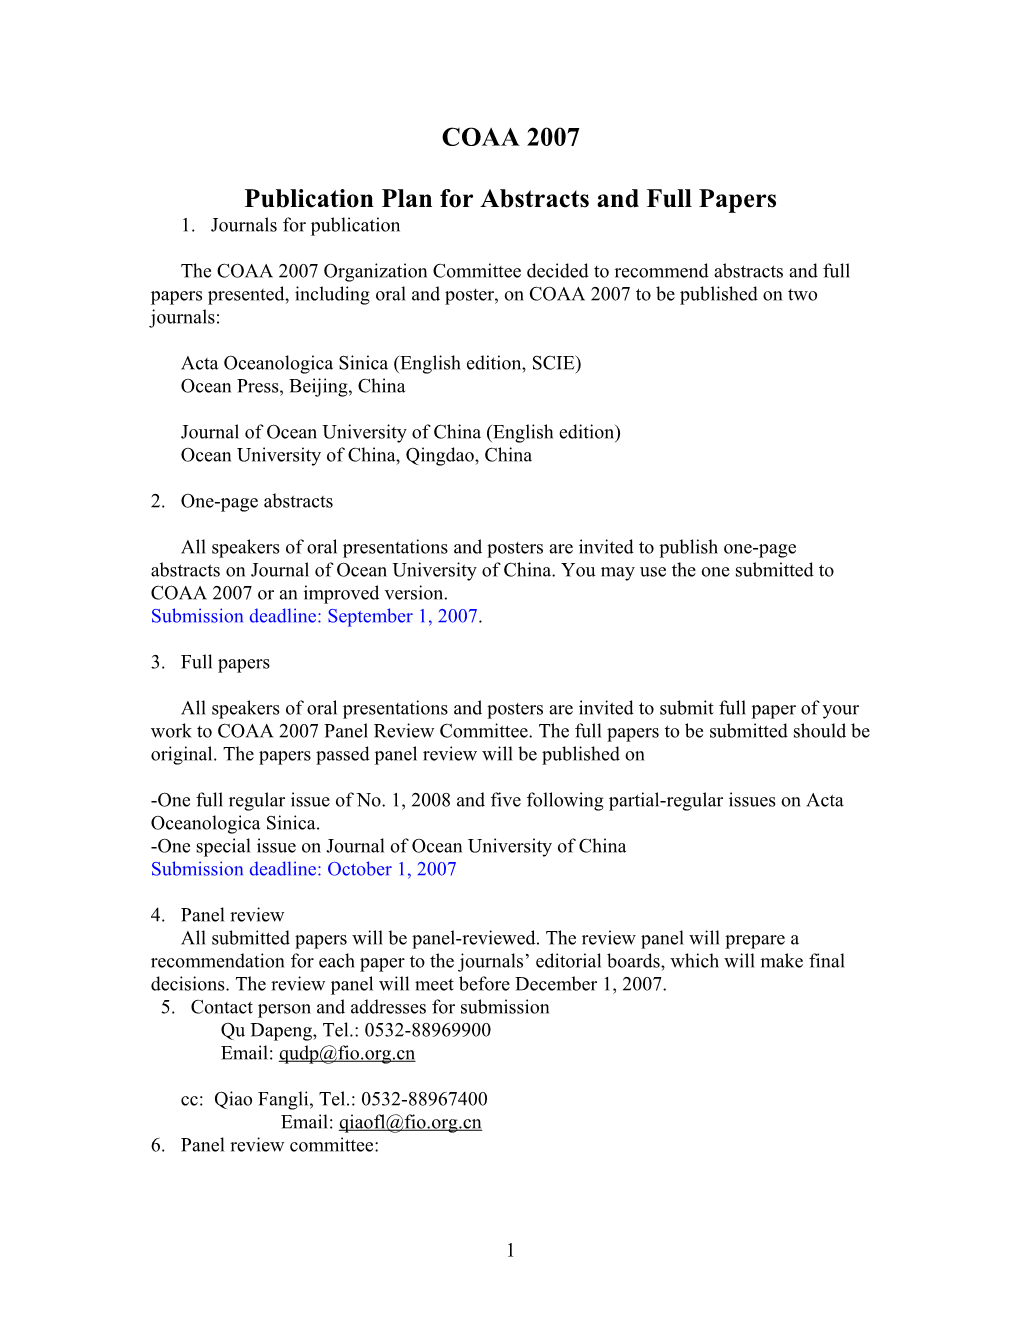 Publication Plan for Abstracts and Full Papers of COAA 2007